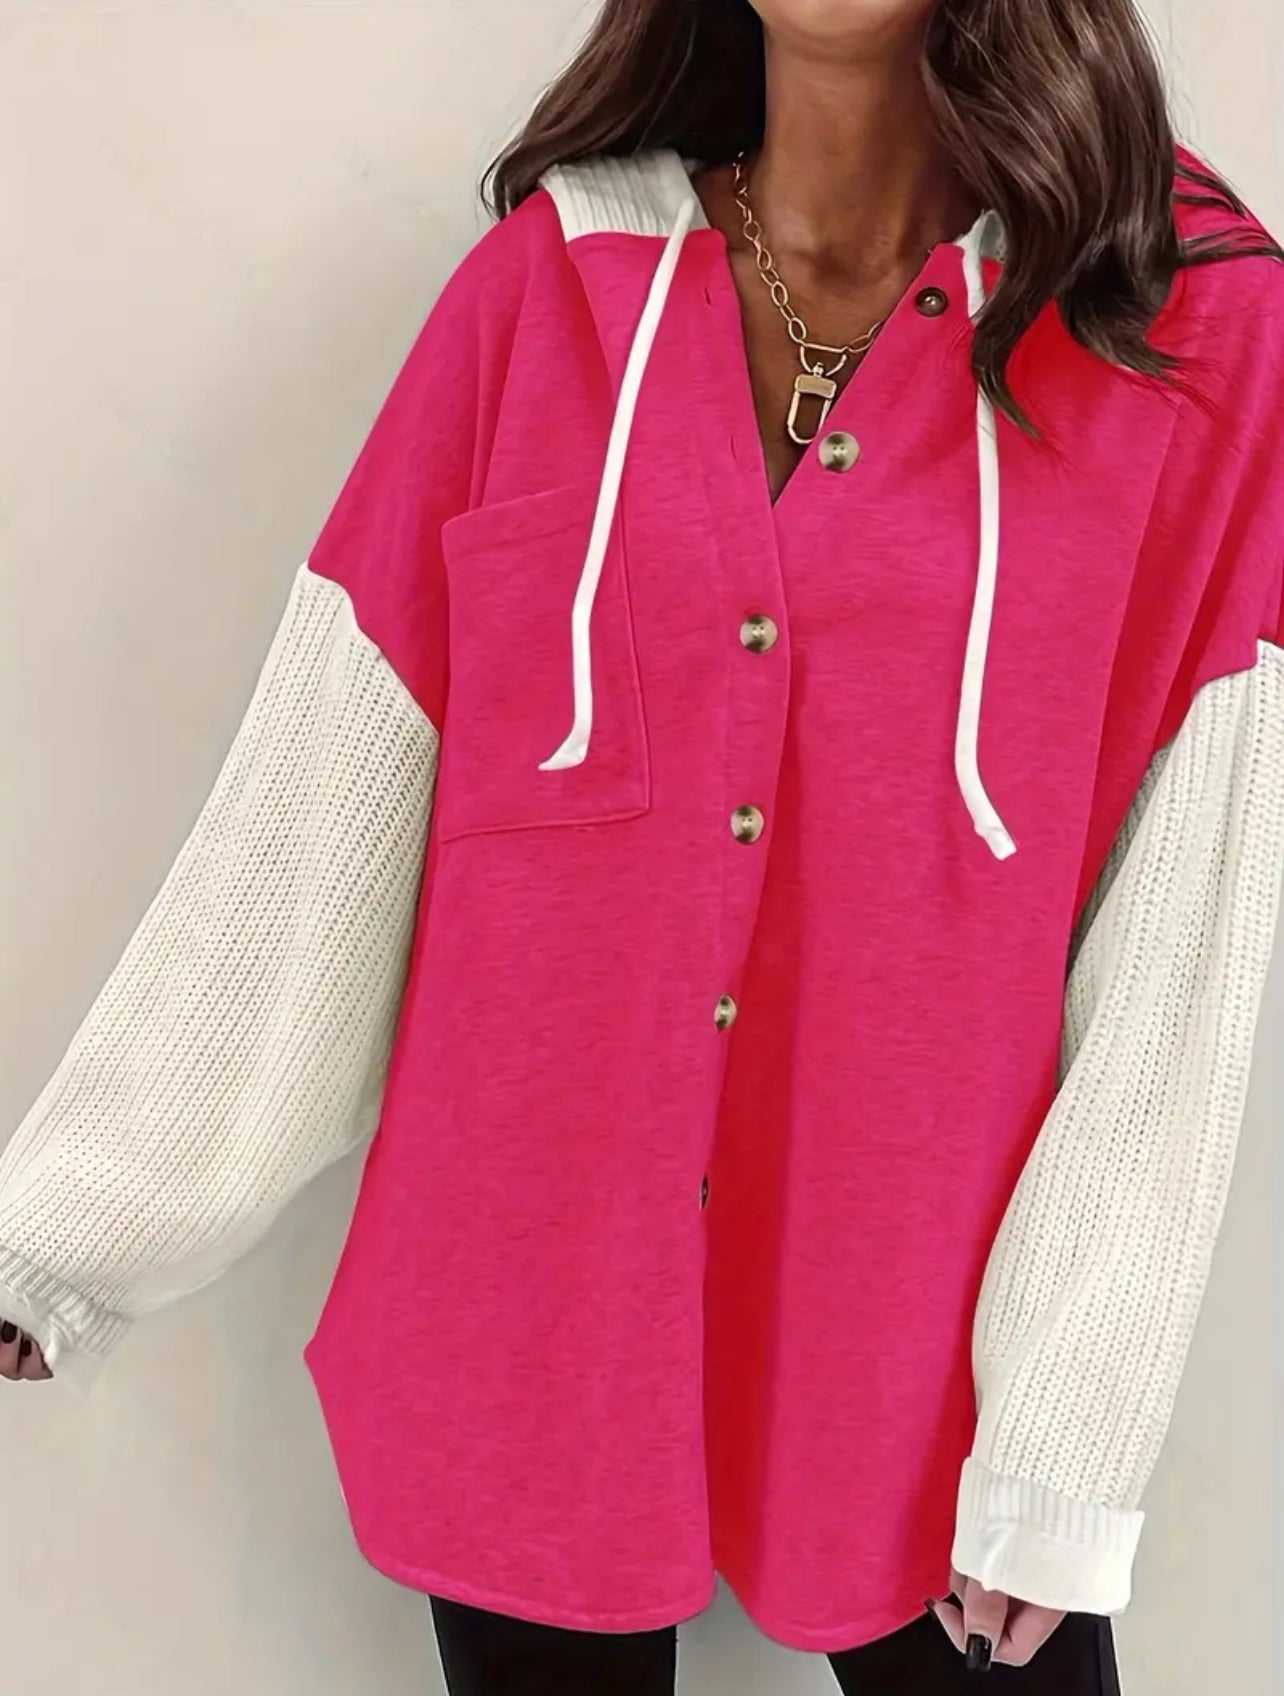 Blush & Slay Plus Size Button Front Pocket Hoodie, Posh 💋 Mommies Collection, S-6XL